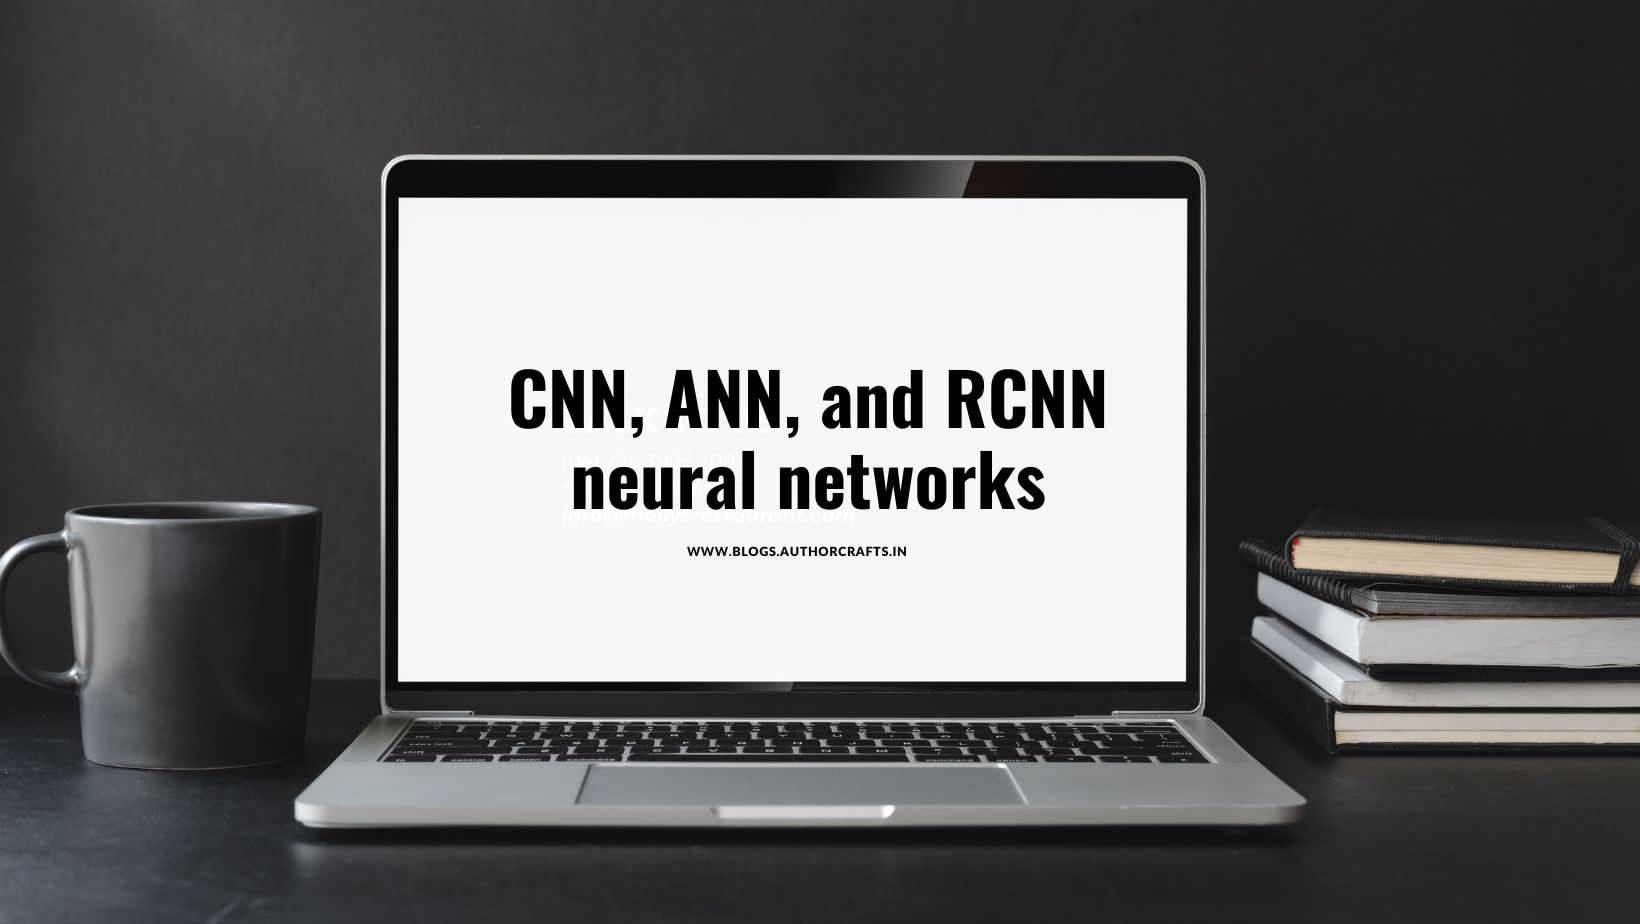 Which is the best among CNN, ANN, and RCNN neural networks?